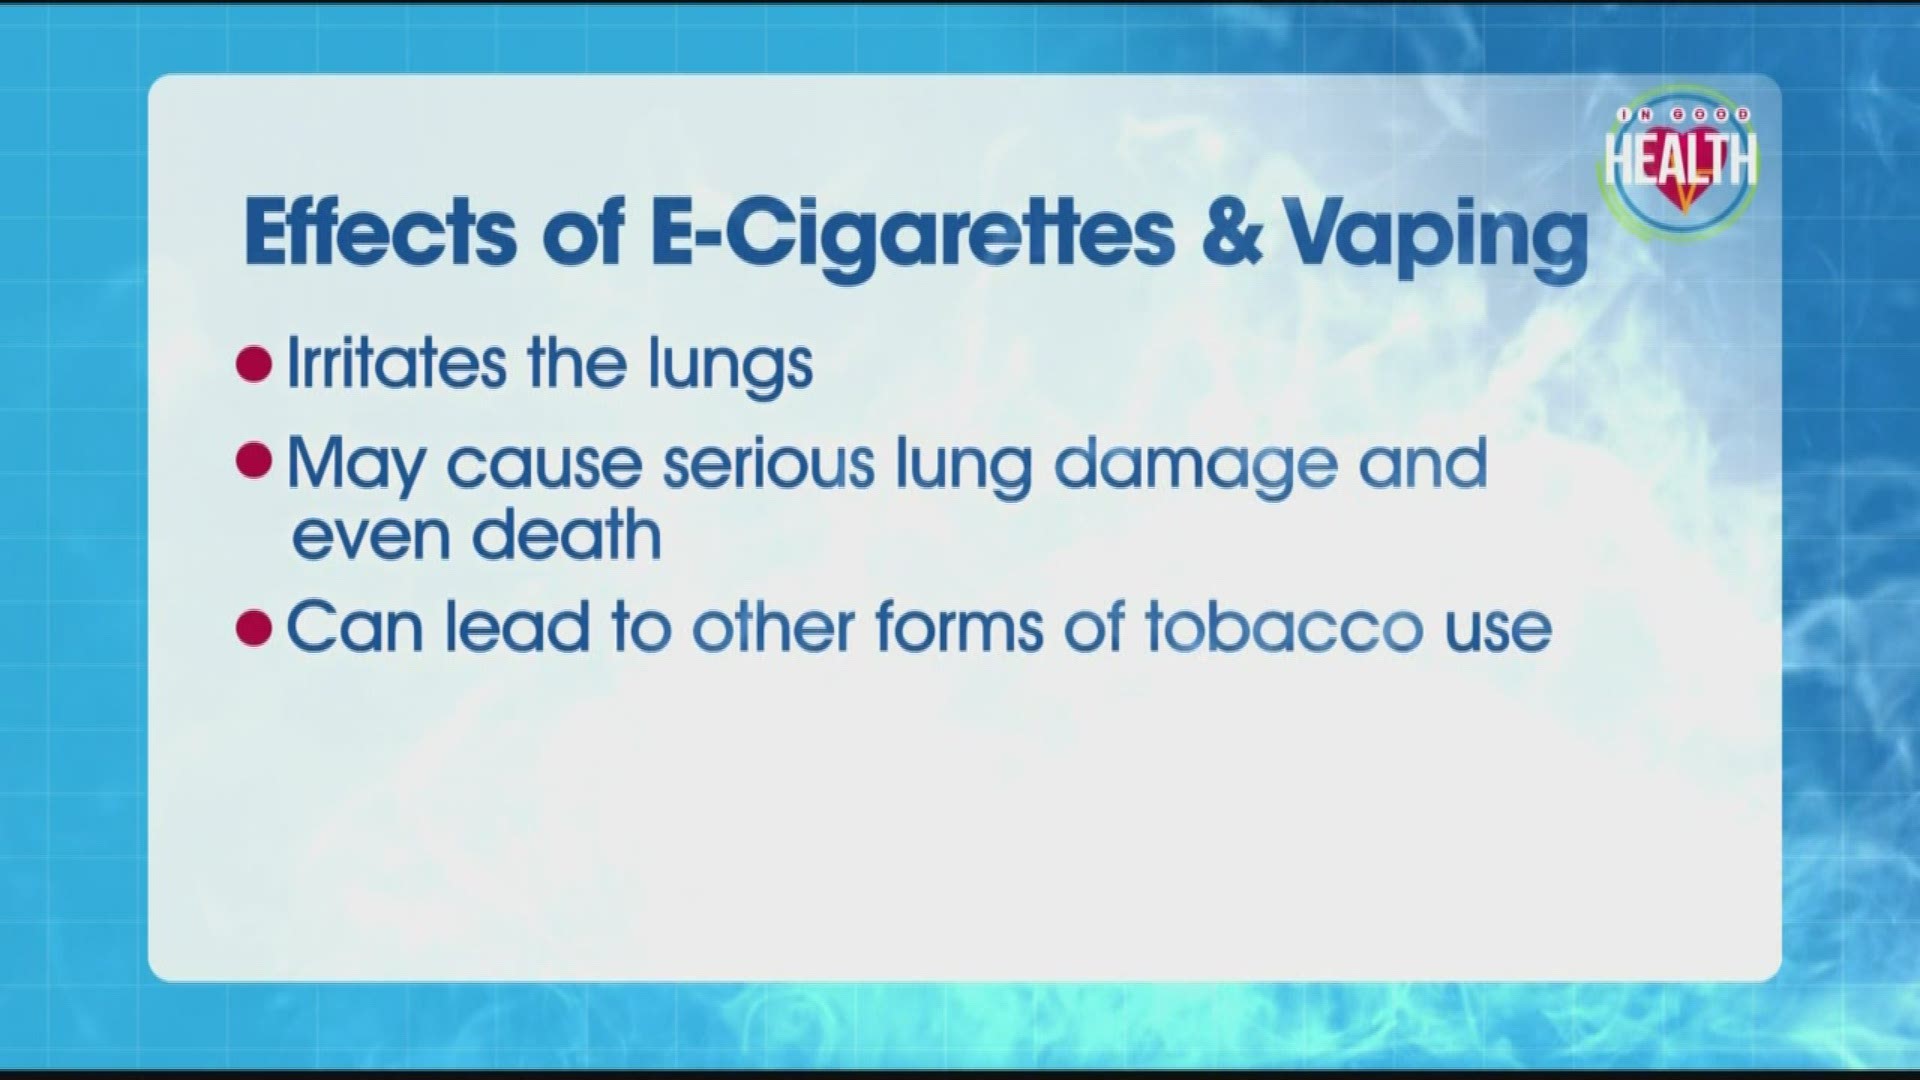 Dr. Sujatha Reddy talks about the health issues surrounding vaping on 'Atlanta & Company'